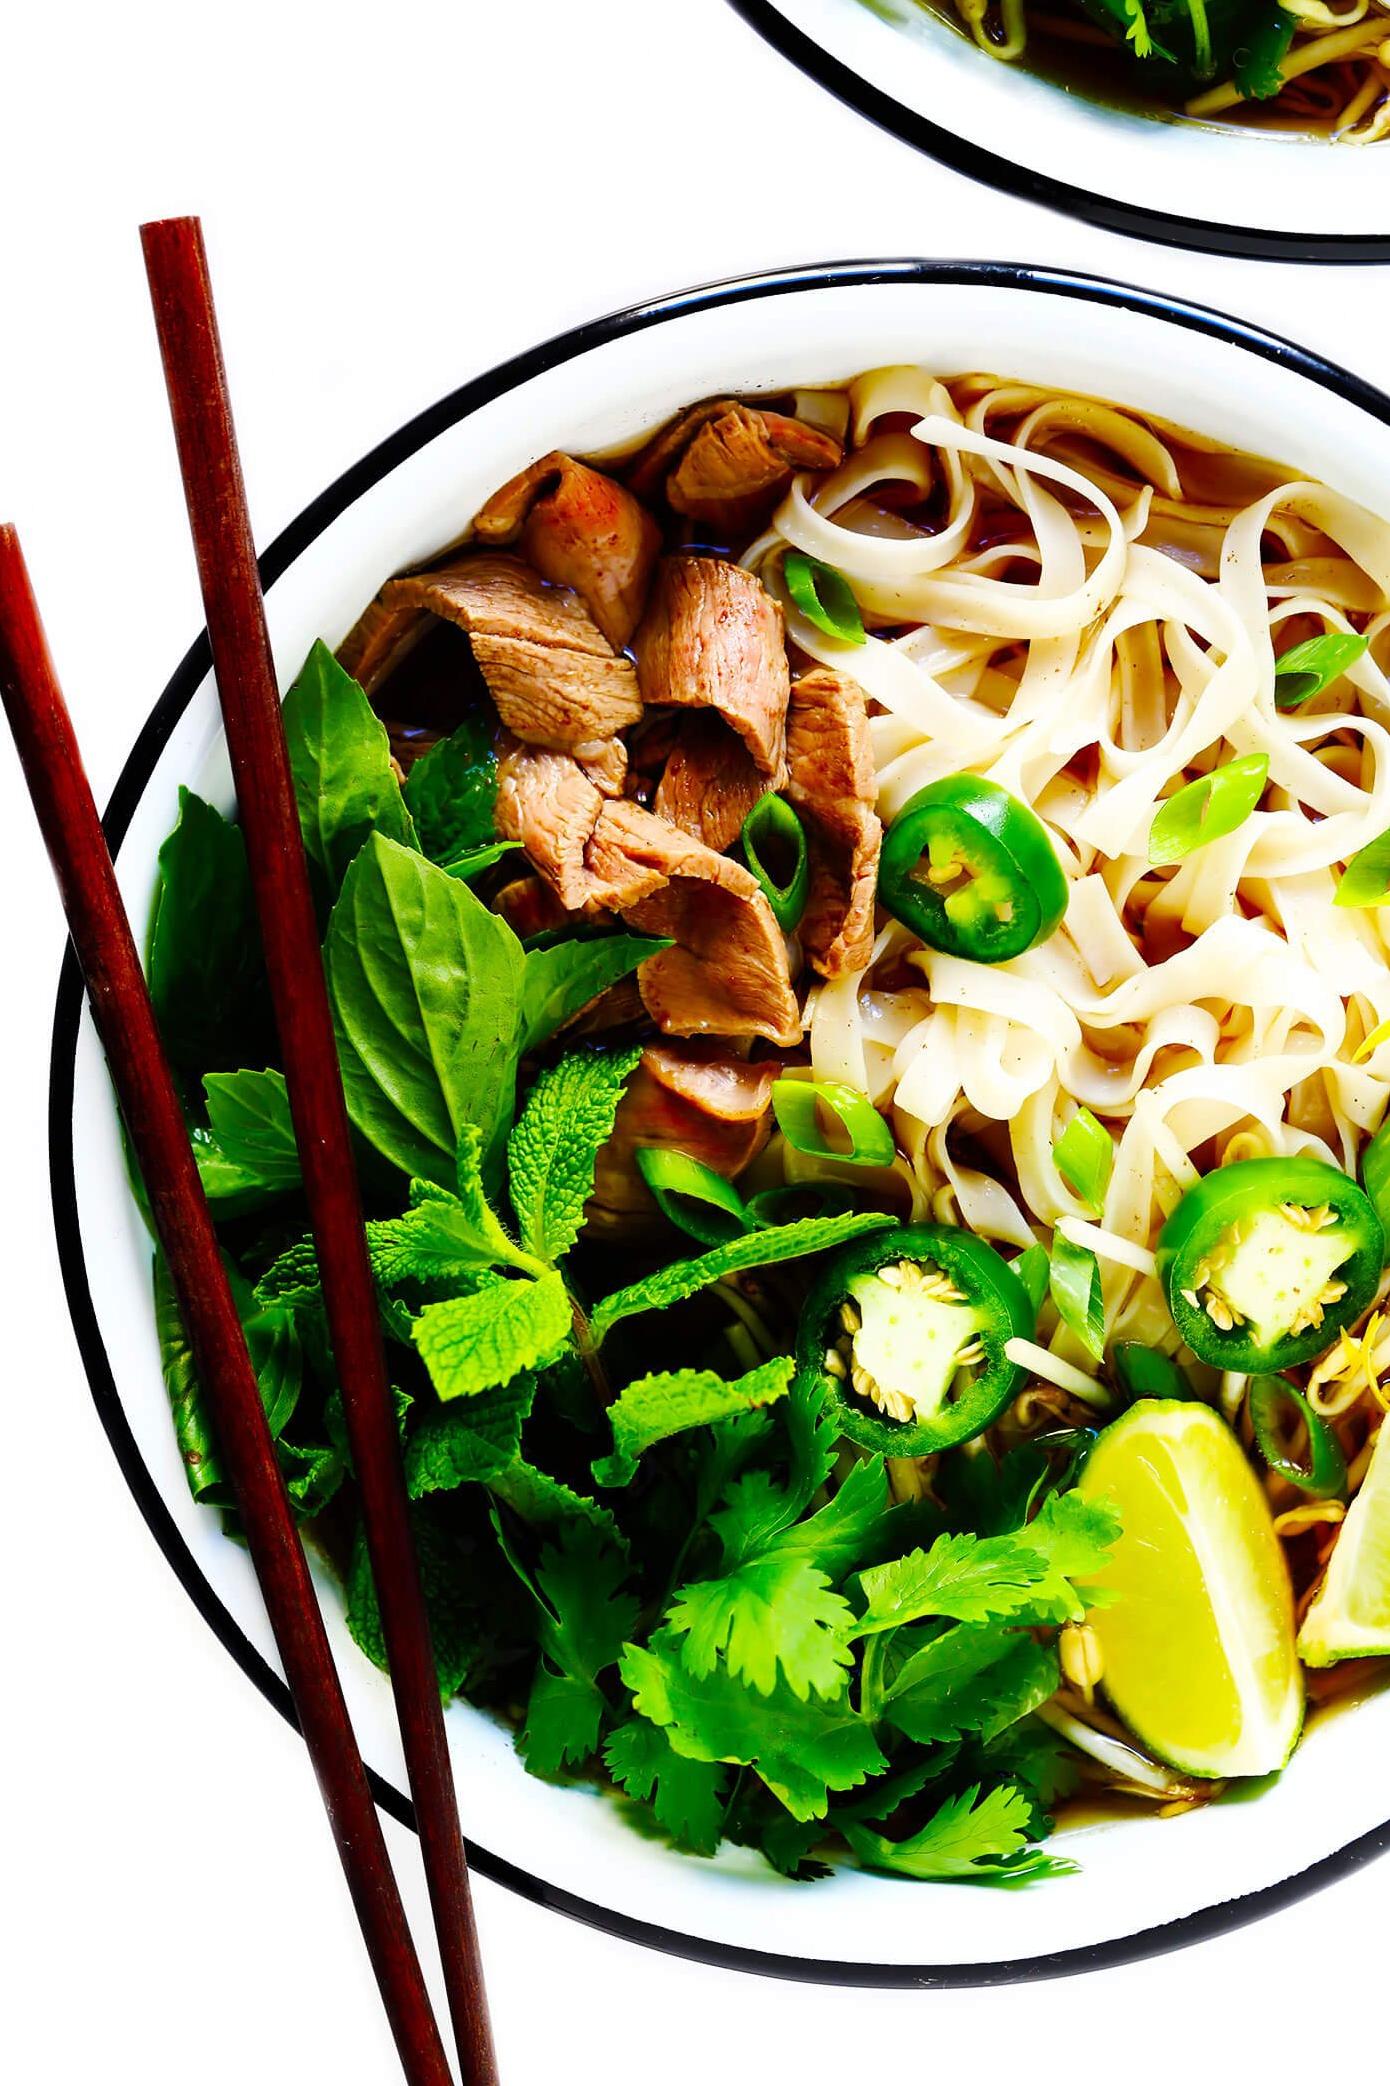  Dive into this bowl of savory beef broth and experience the satisfaction of a traditional Vietnamese soup.